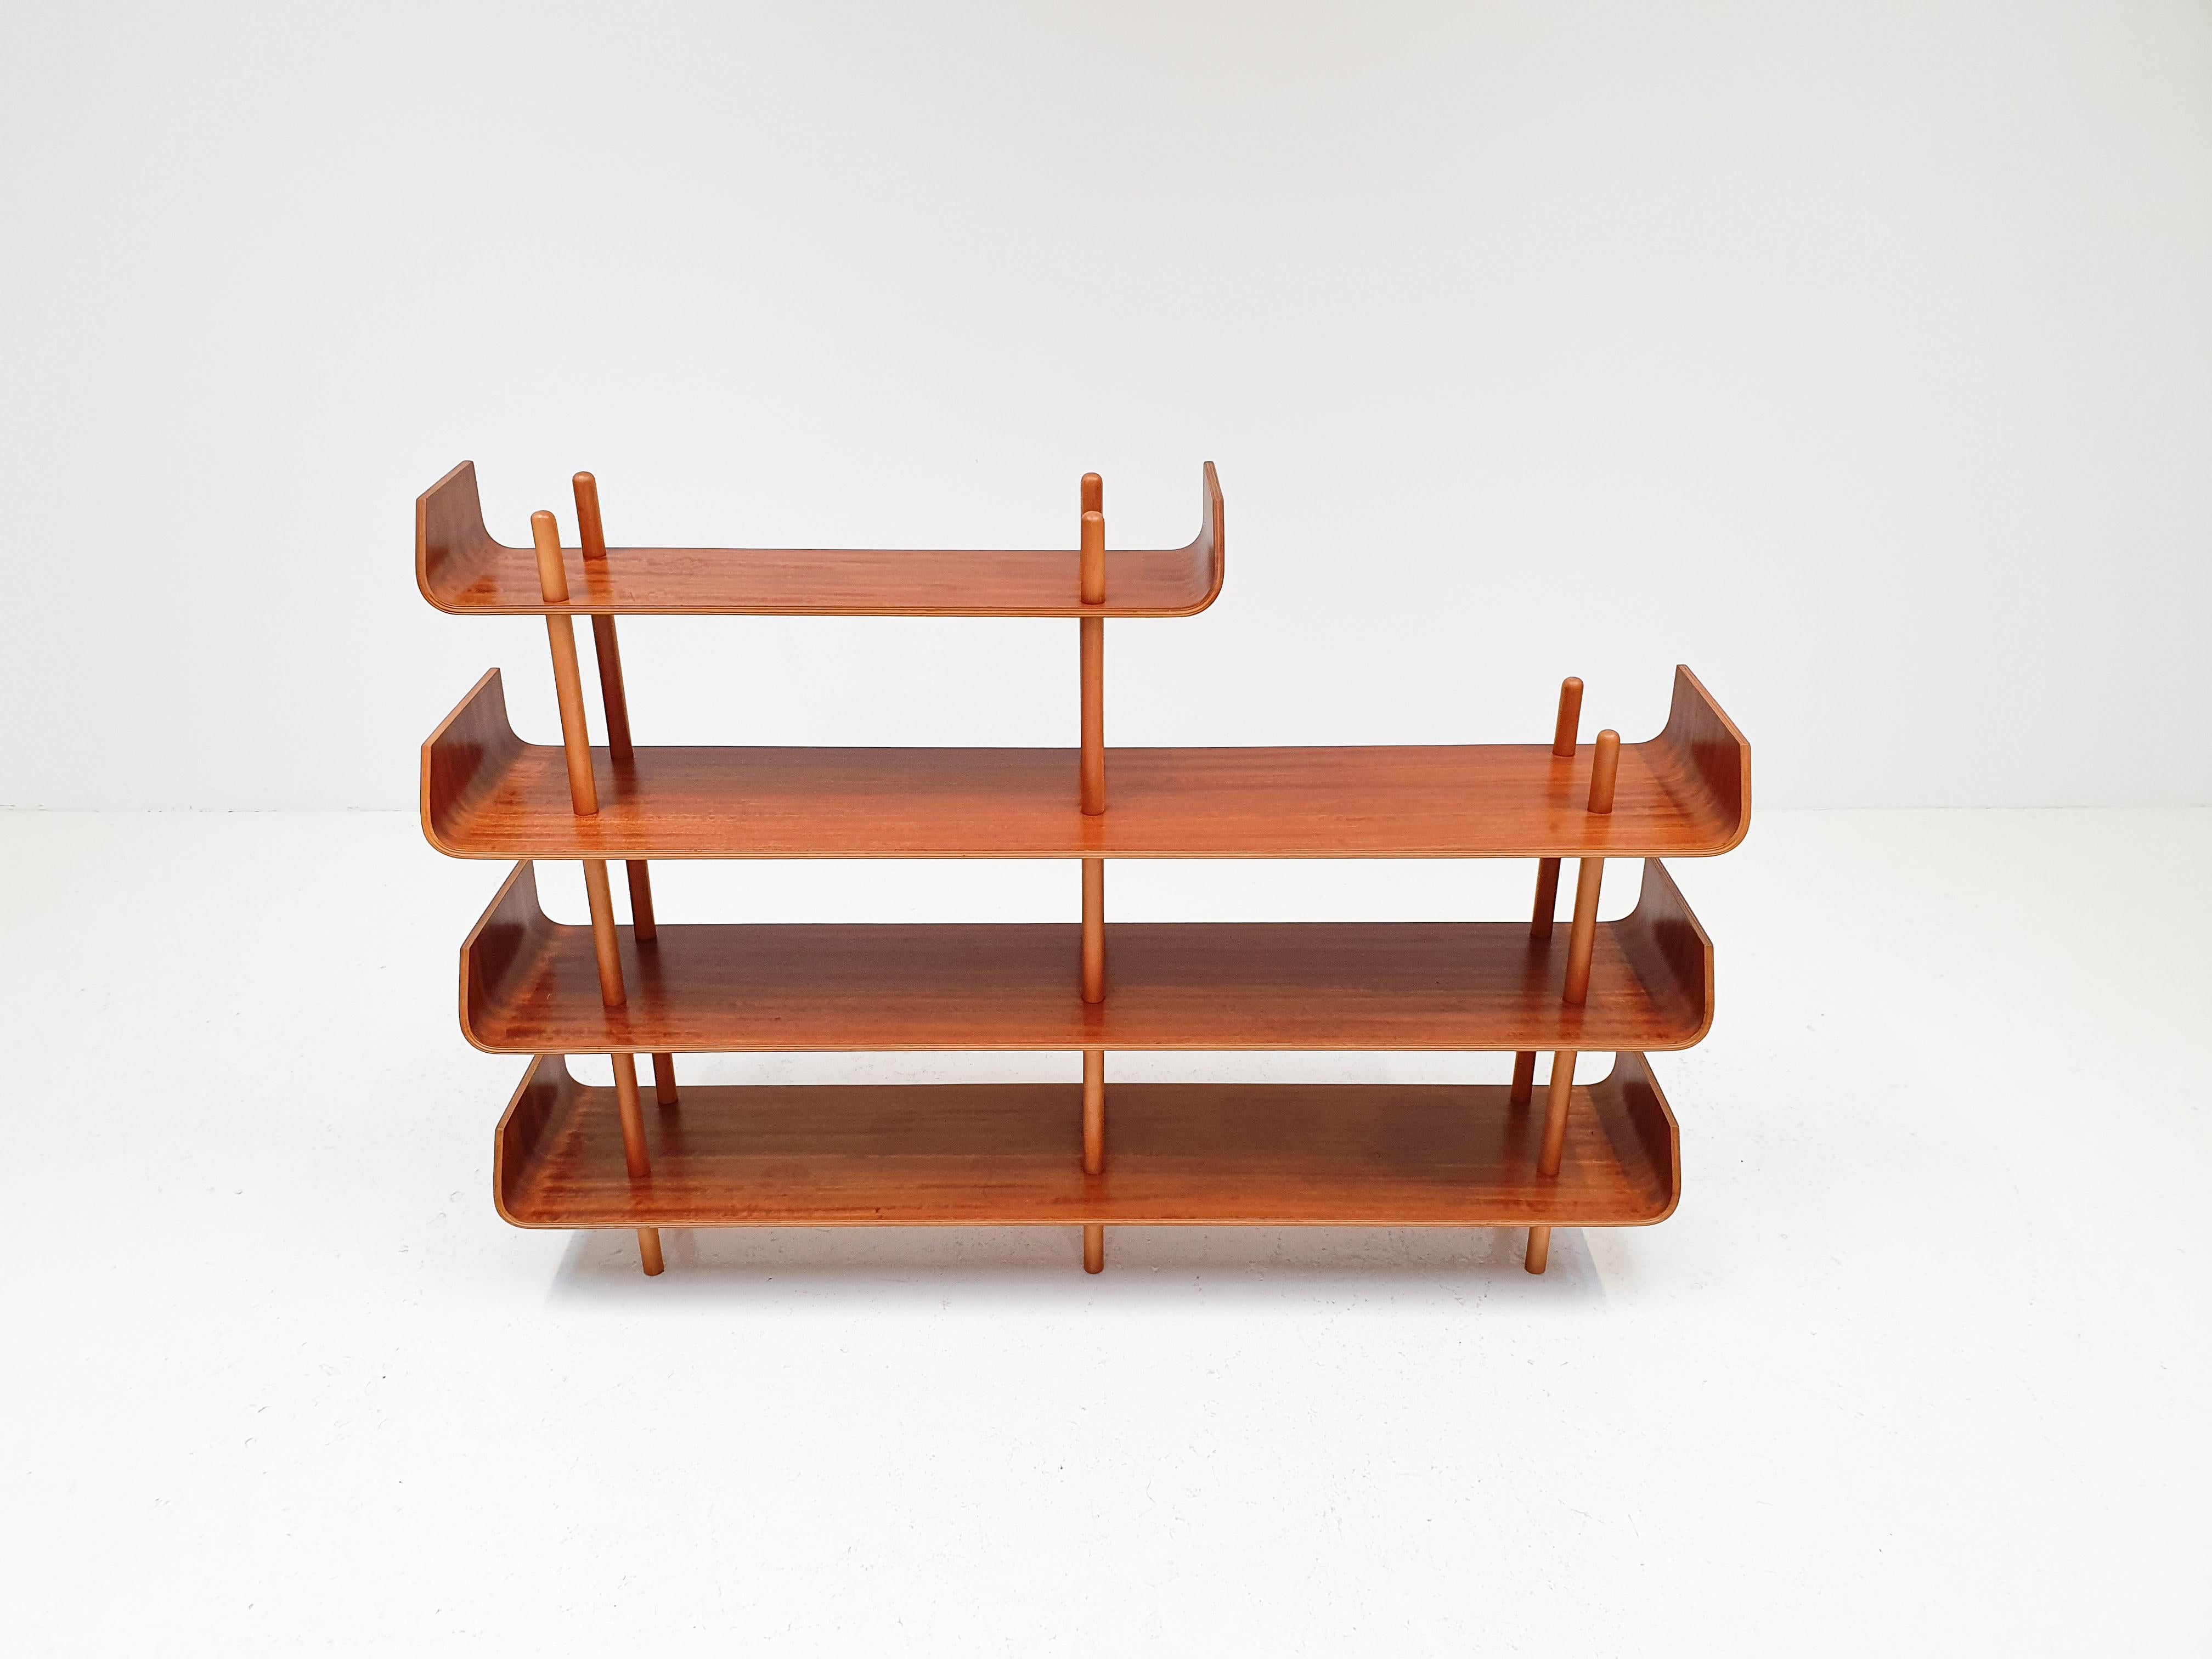 A plywood shelving unit by Willem Lutjens for De Boer Gouda, with the characteristic curved ends of the shelves which has made this such a famous and now rare design. The piece was designed in 1953 and manufactured in the Netherlands.

The